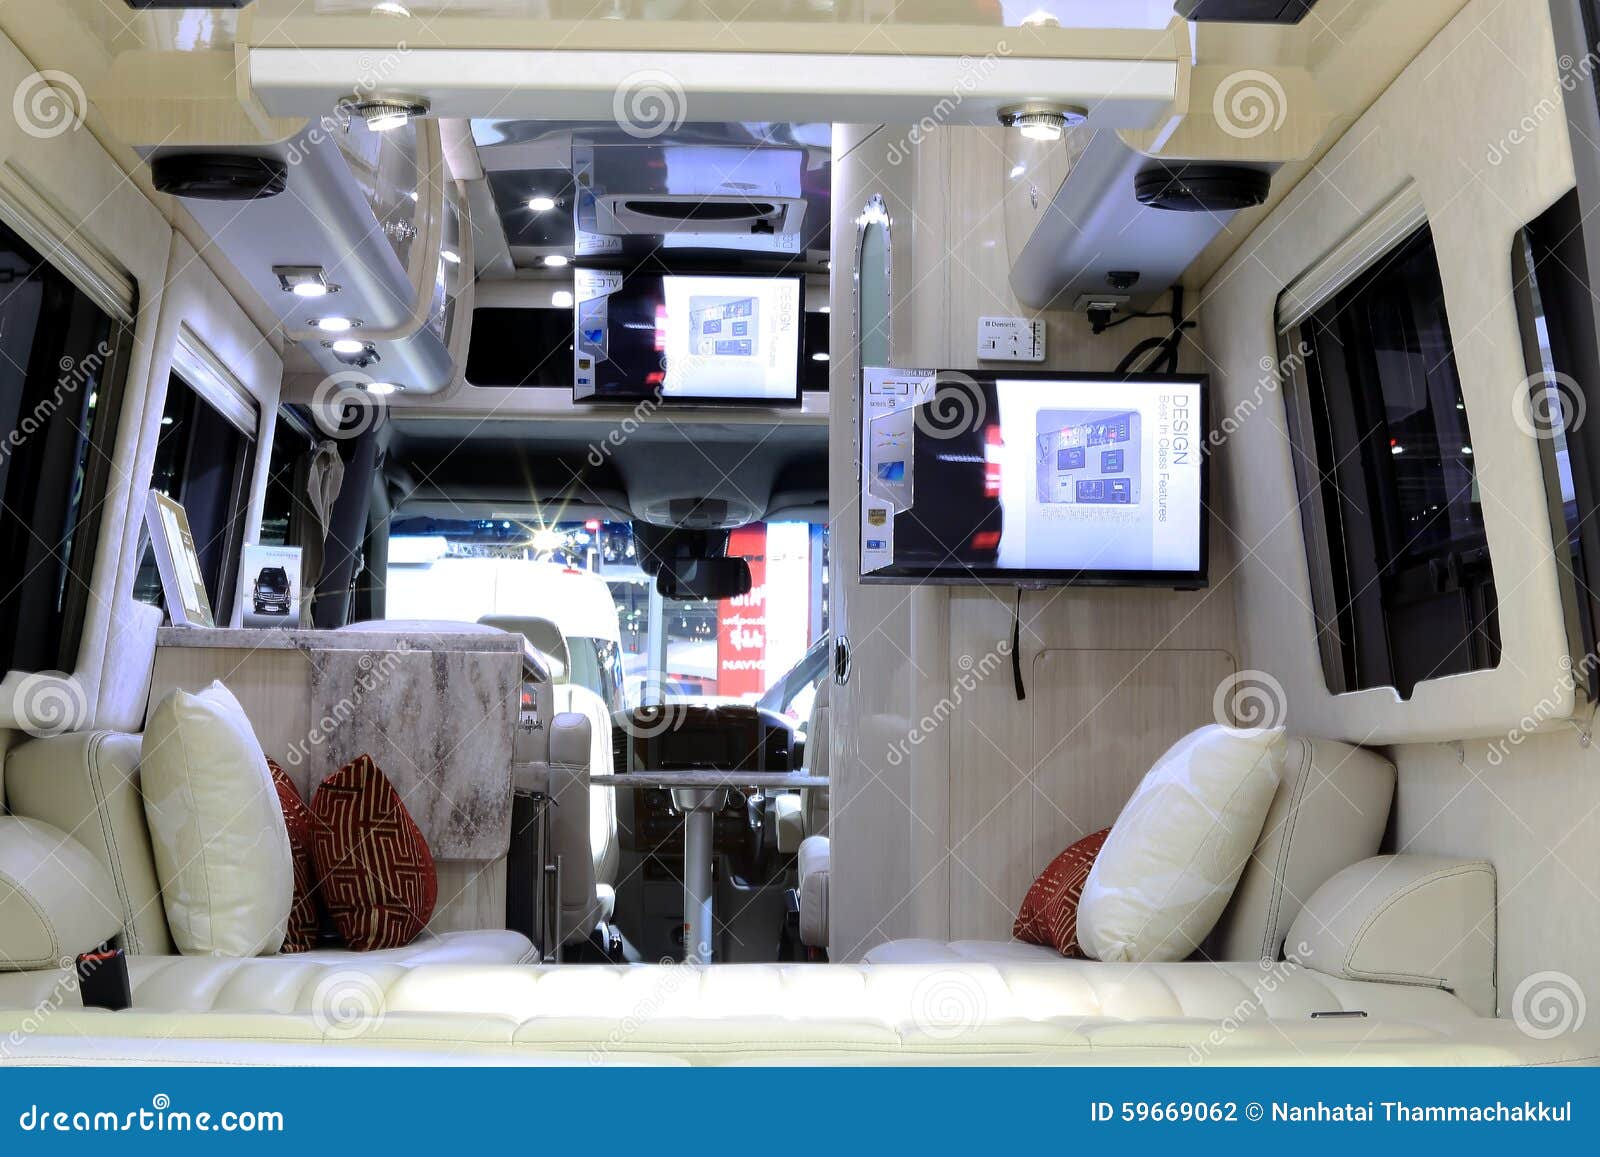 Luxury Interior Decoration In Mercedes Benz Mobile Home Car